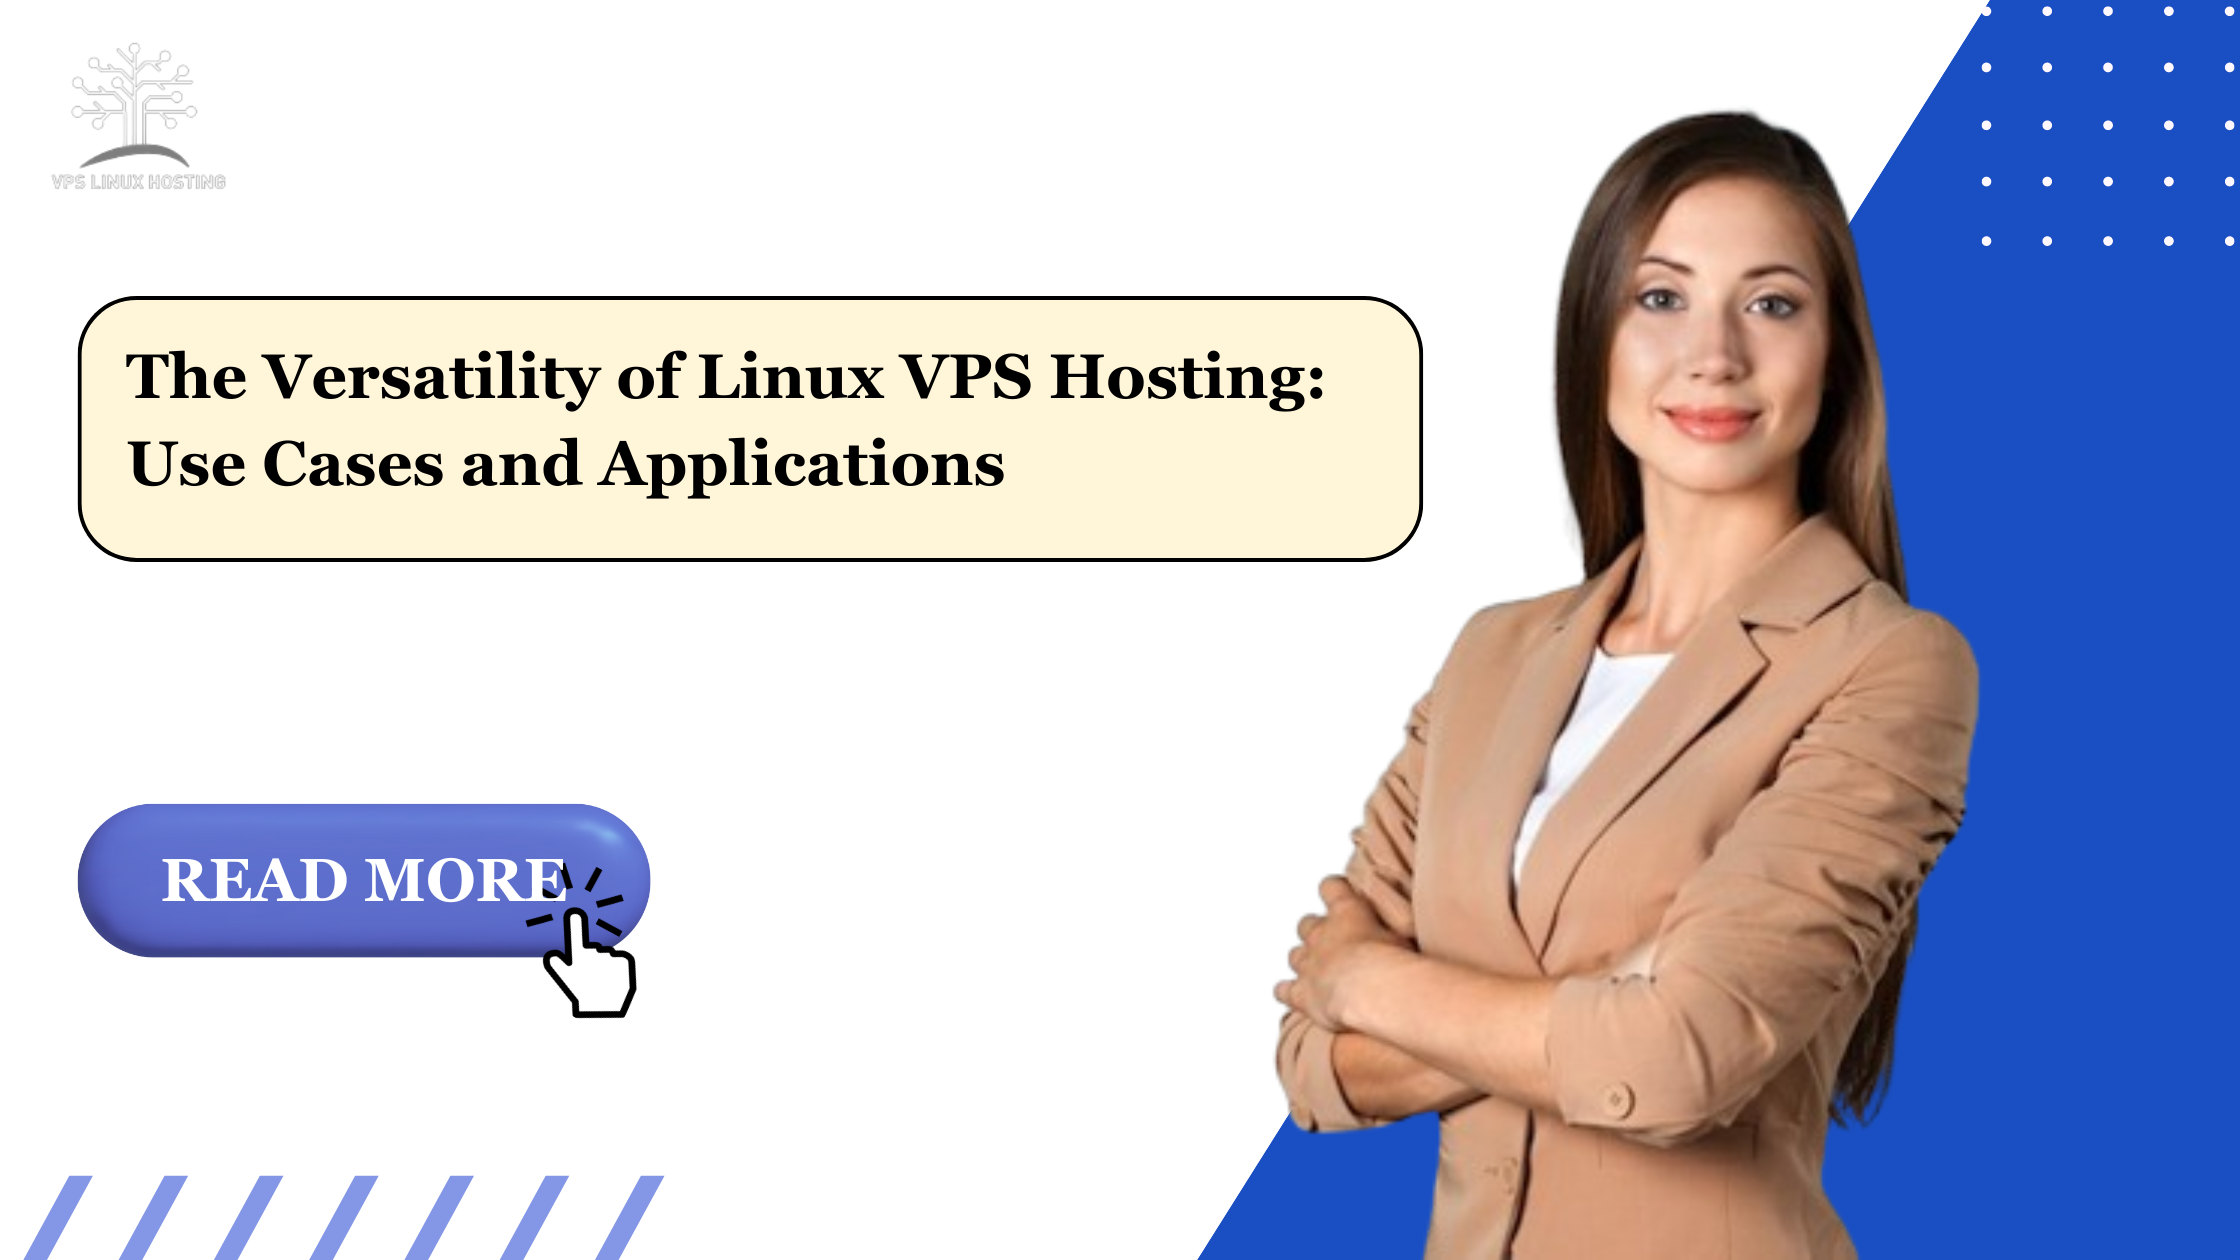 The Versatility of Linux VPS Hosting: Use Cases and Applications